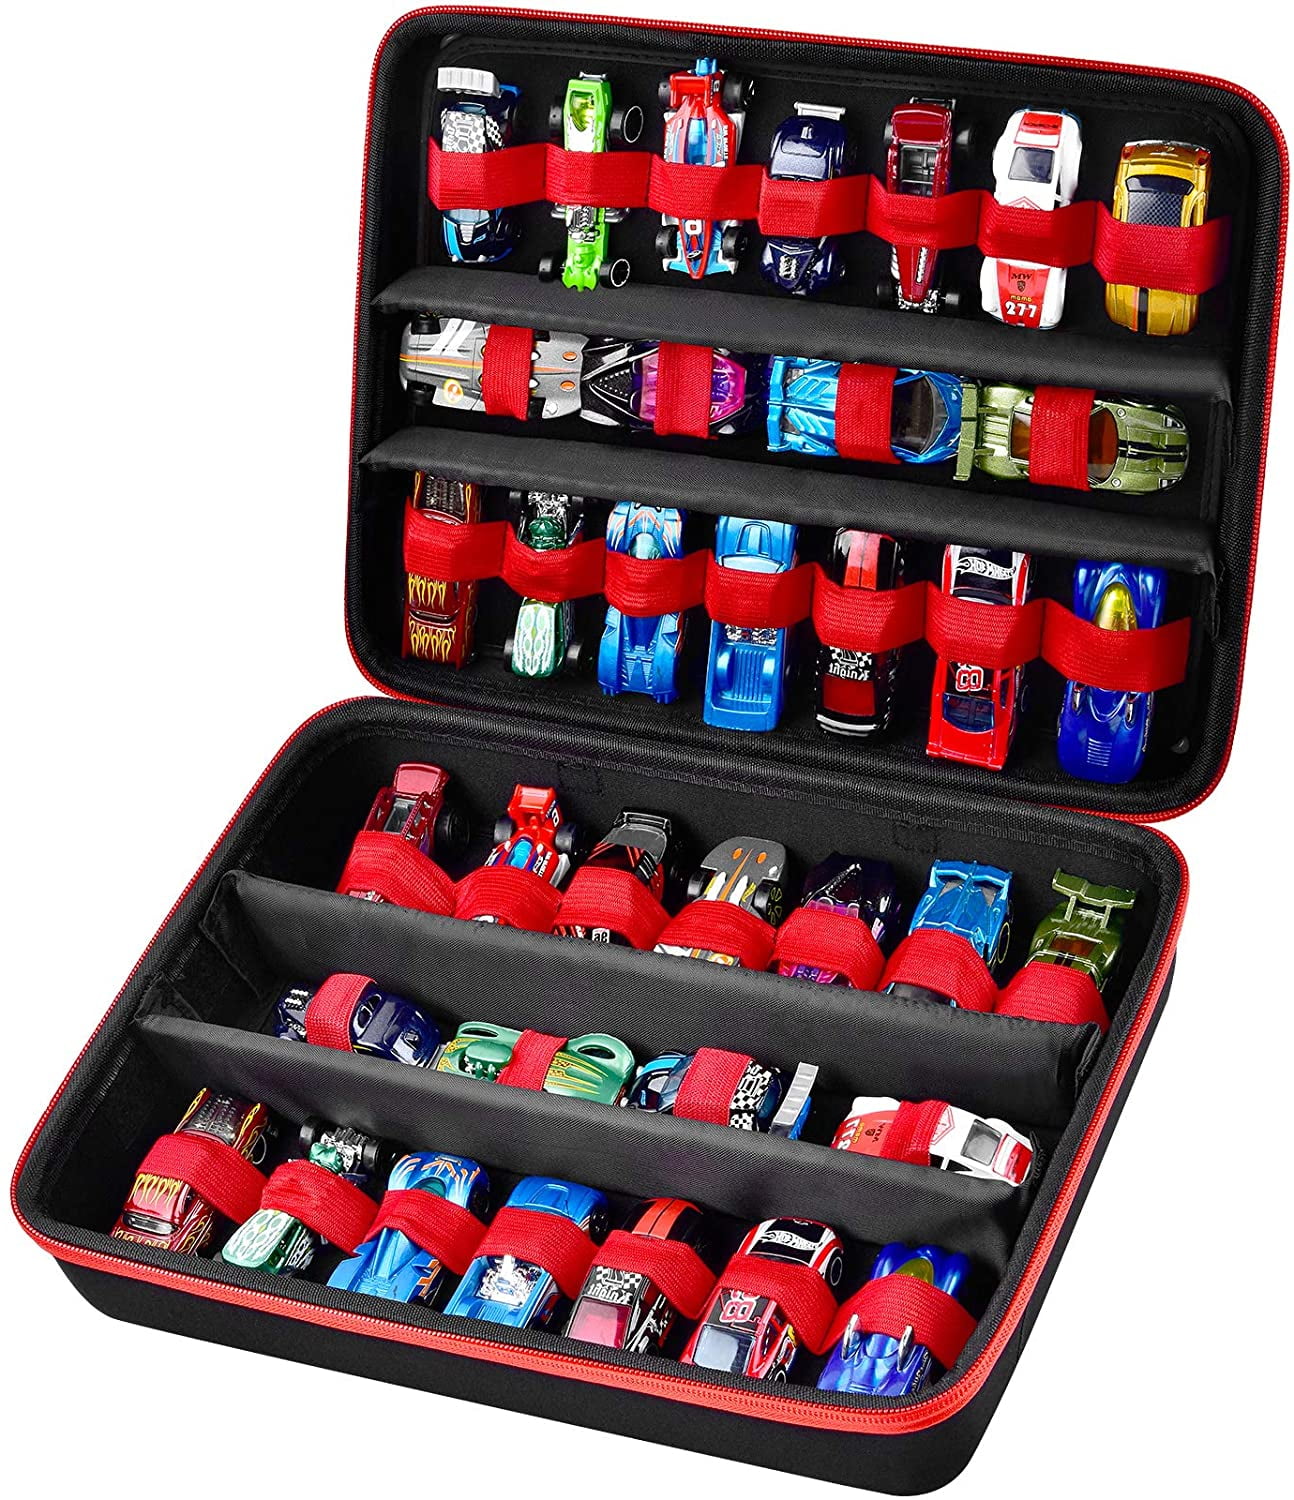 Comecase Toy Storage Organizer Case Compatible with Hot Wheels Car, for Matchbox Cars, Portable Carrying Container Carrier Holder Fit for 36 Toys Car (Box Only